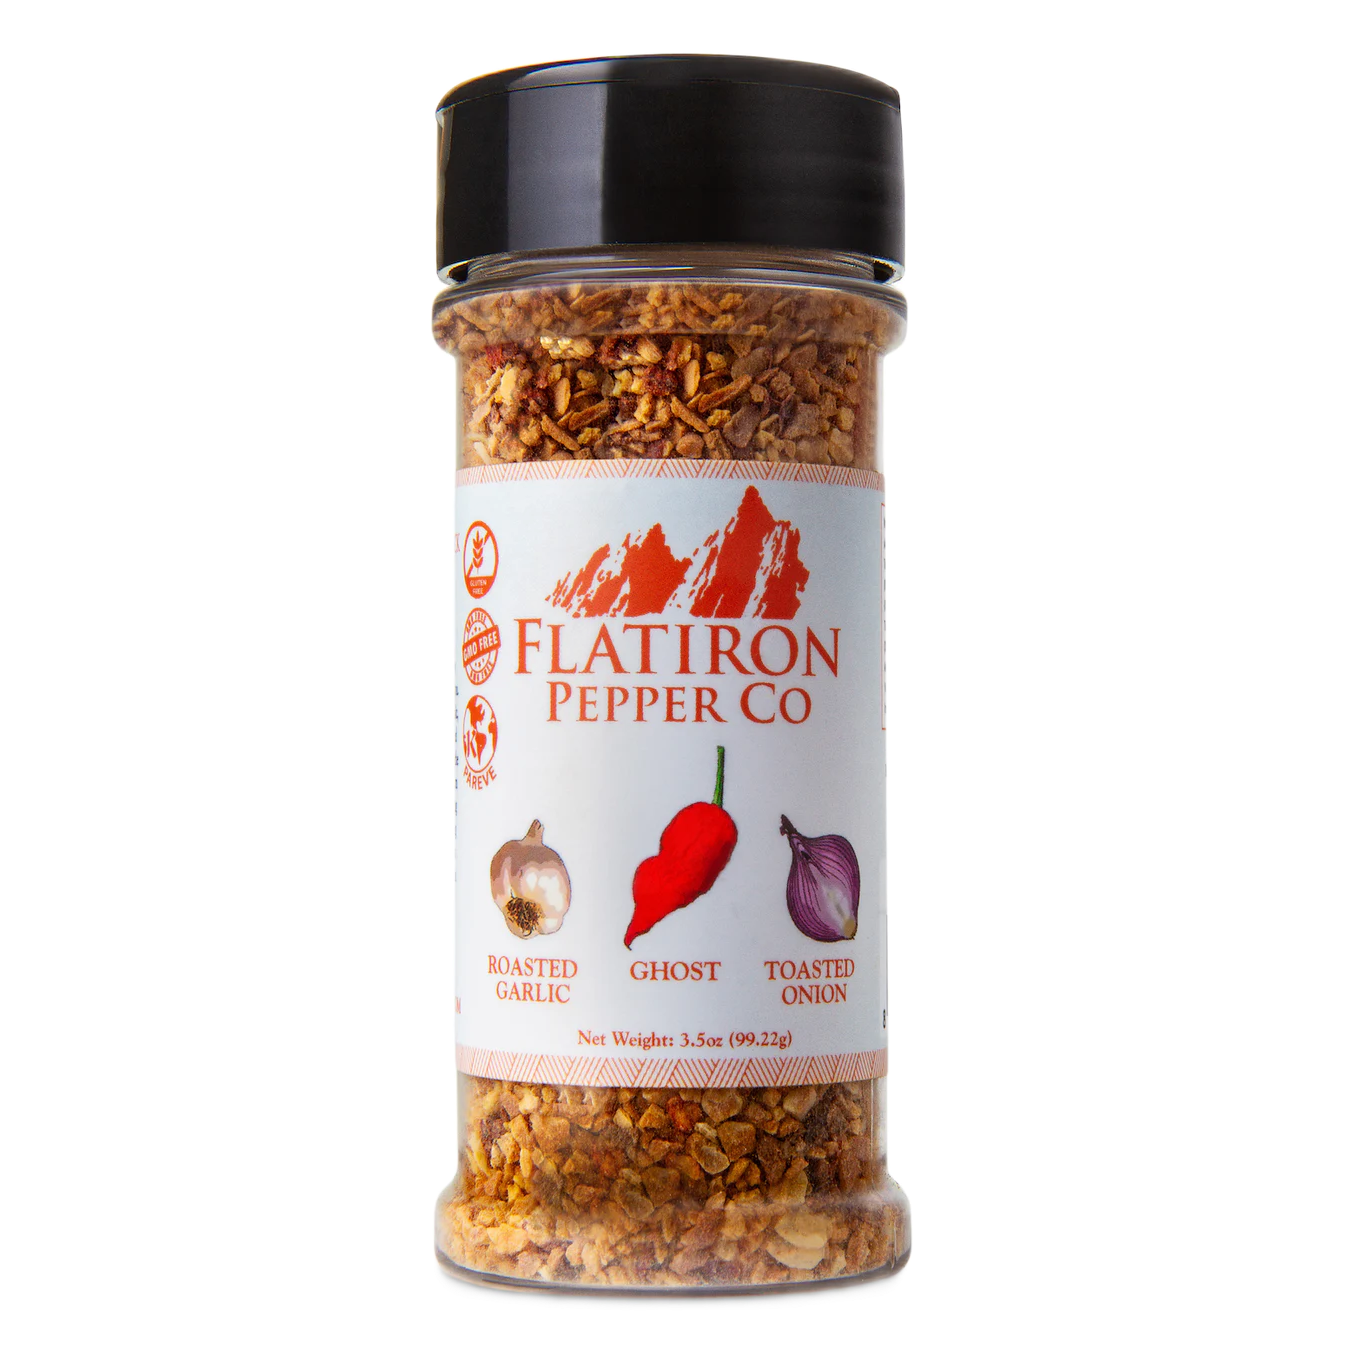 Ghost Pepper - Roasted Garlic - Toasted Onion Spice Blend – Oh Man!